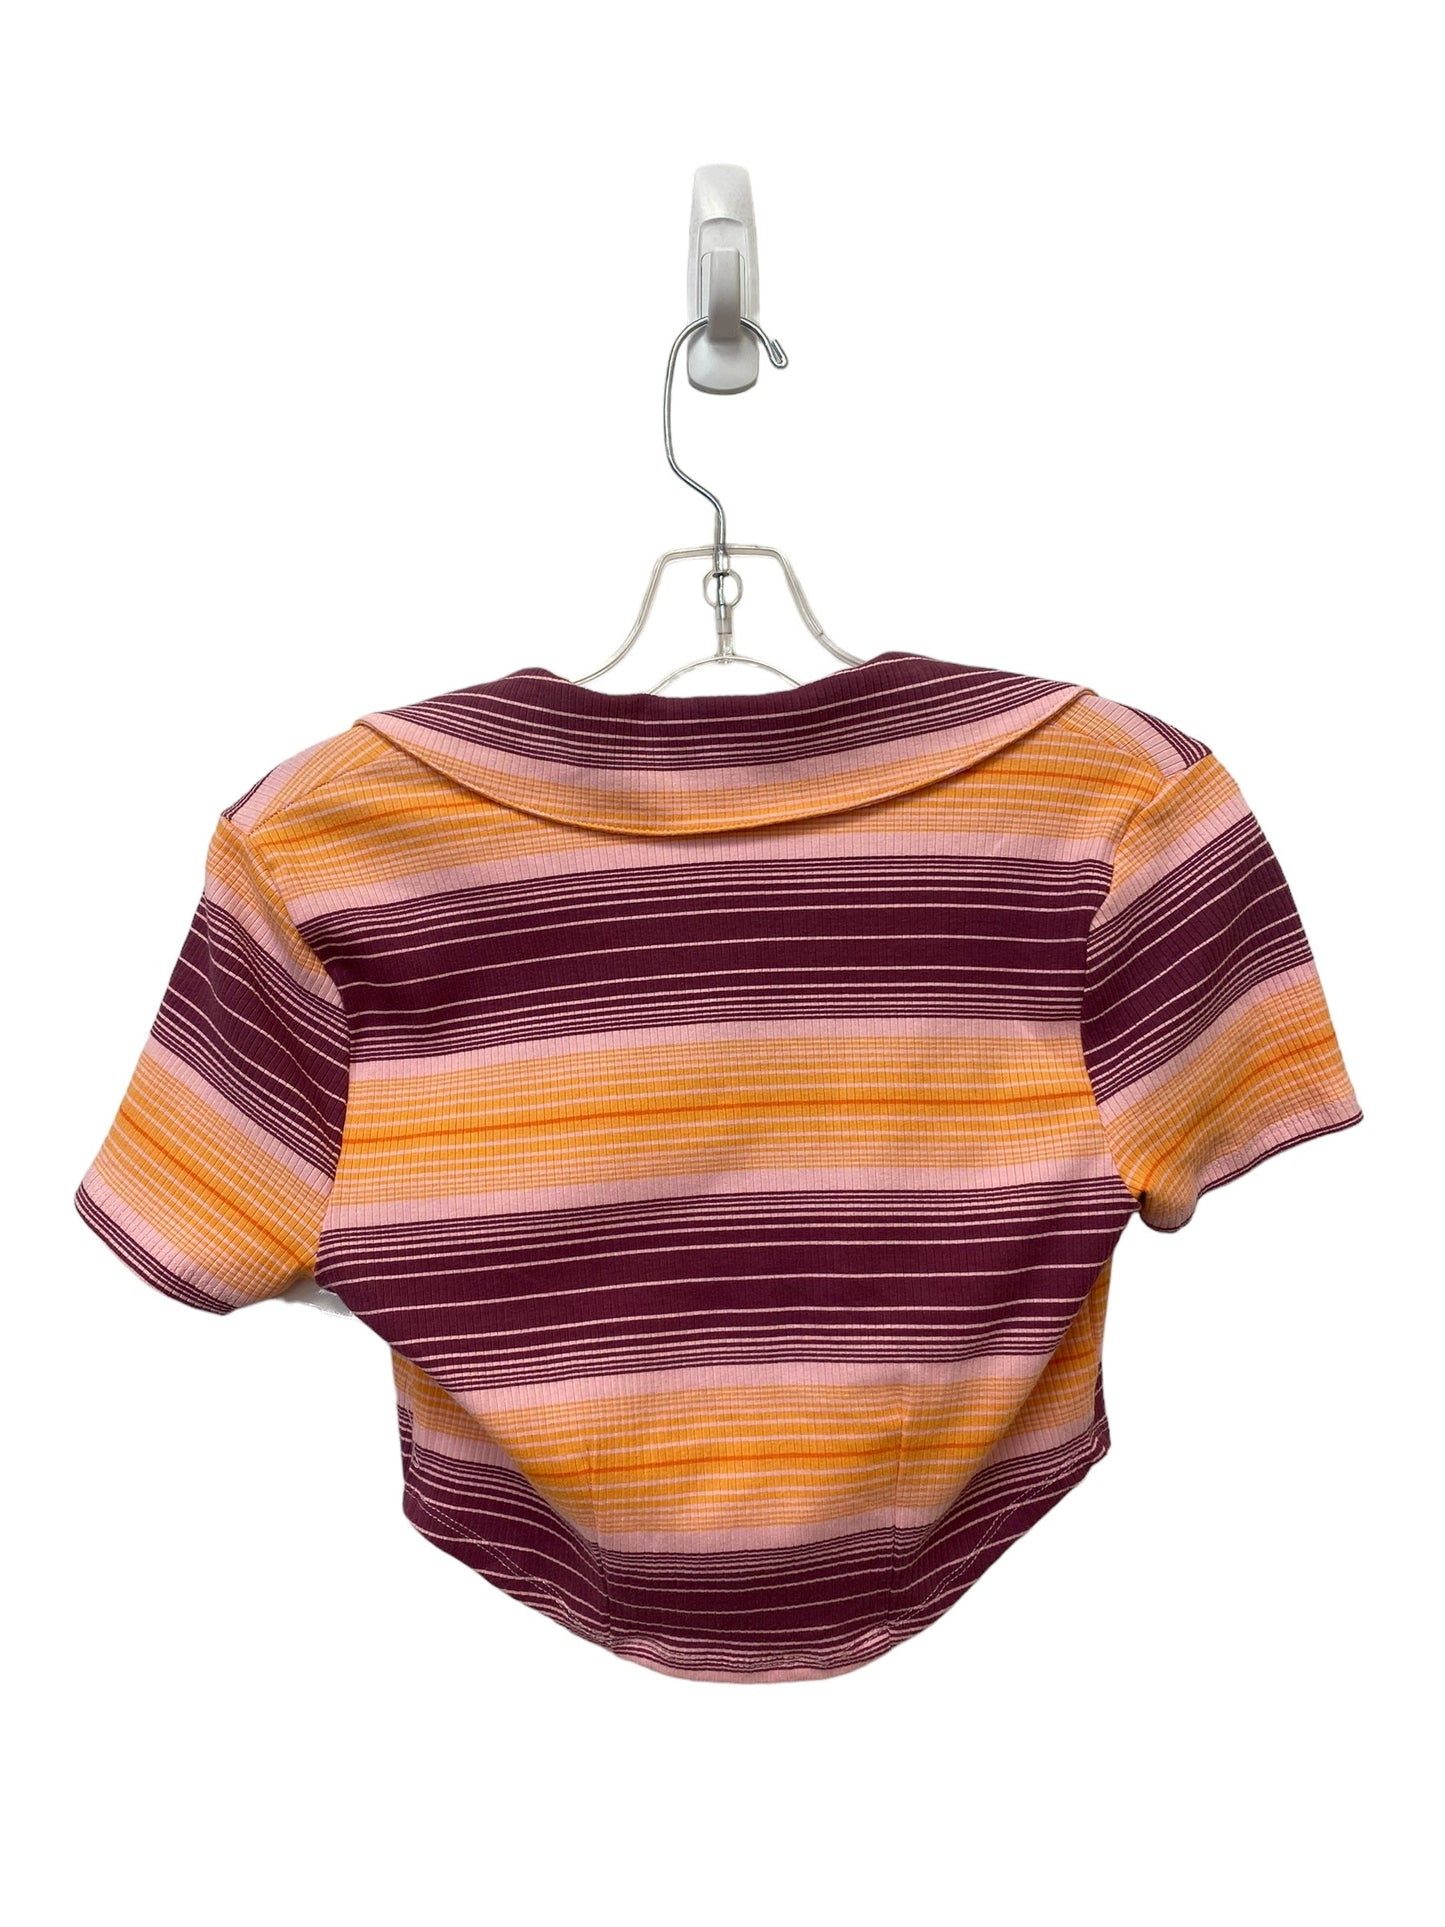 Striped Pattern Top Short Sleeve Wild Fable, Size S